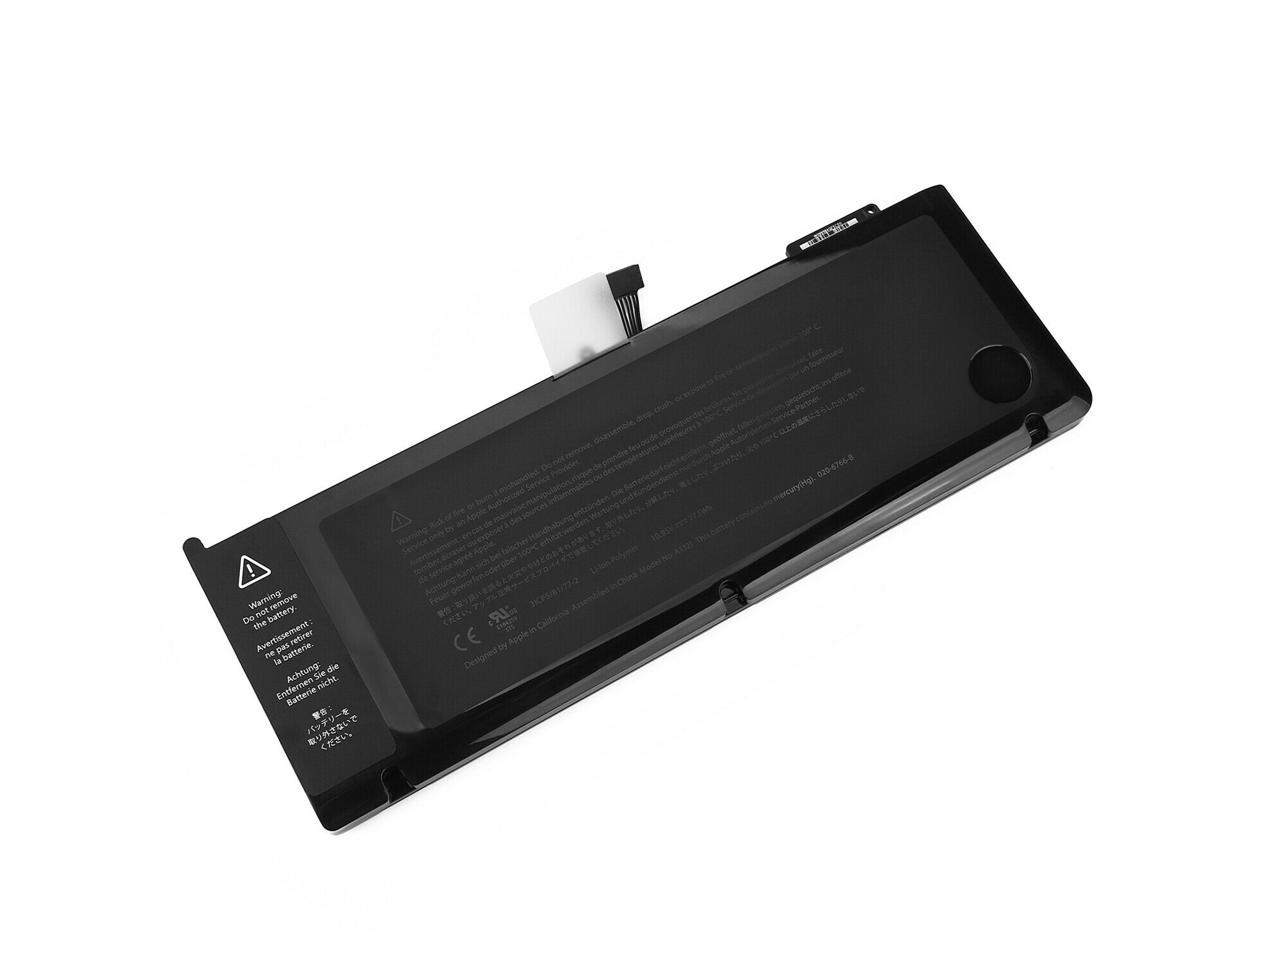 Apple A1321 Genuine Battery Pack MacBook Pro 15 A1286 Mid 2009-2010 661-5476 661-5211 020-6766-B